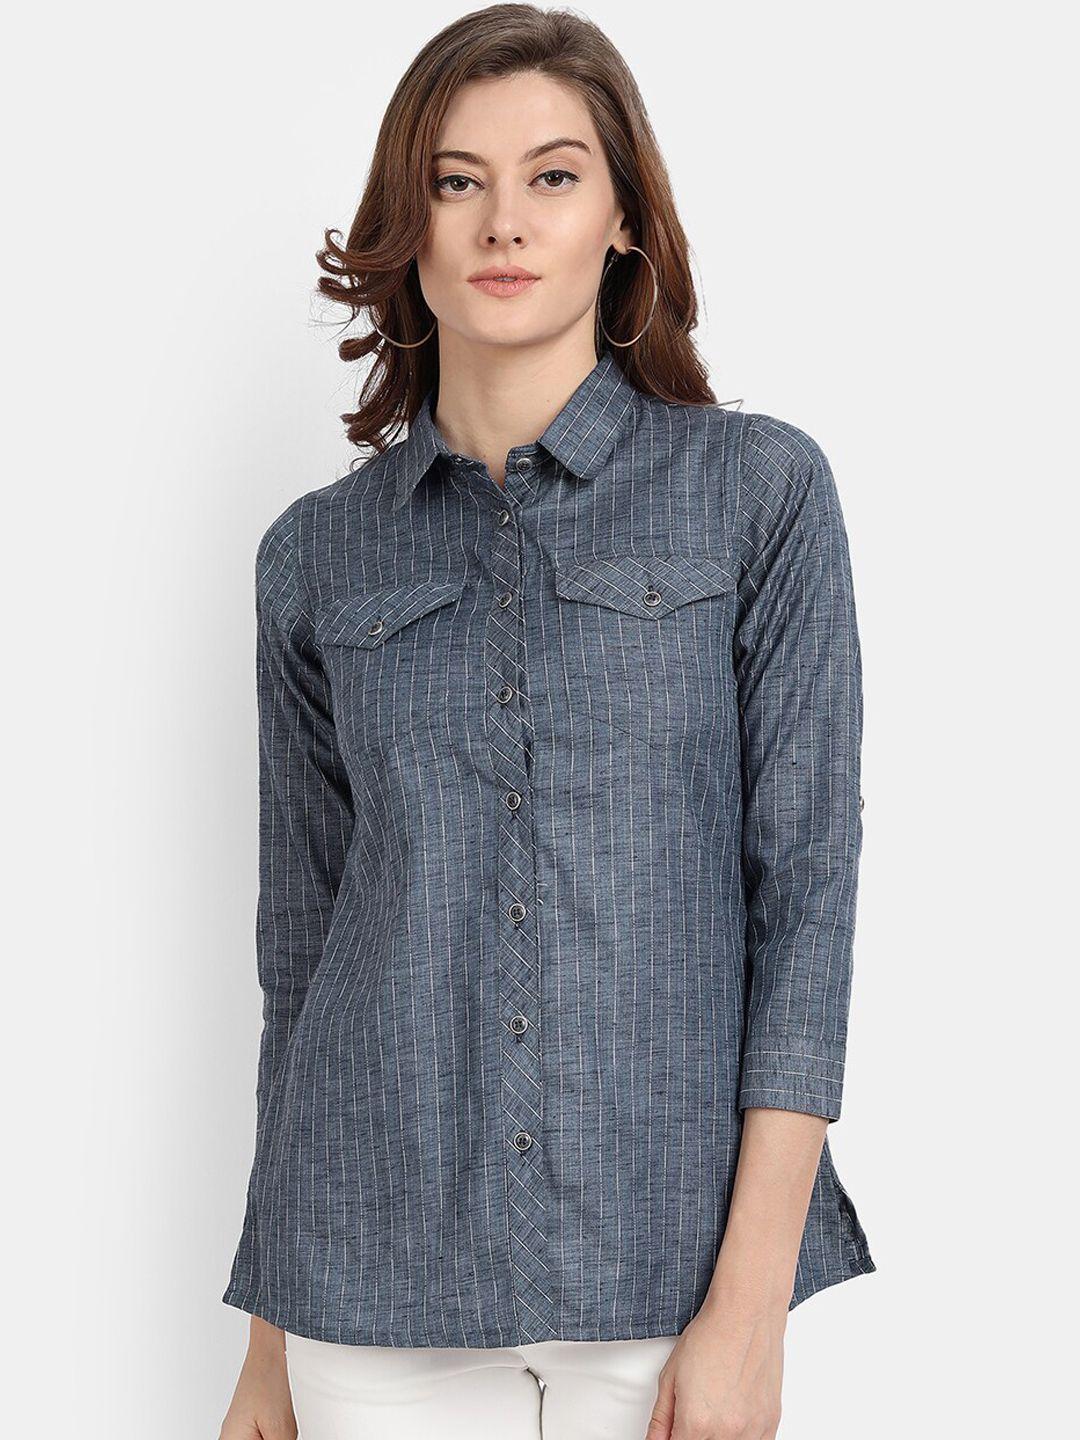 hk-colours-of-fashion-women-navy-blue-slim-fit-solid-casual-shirt